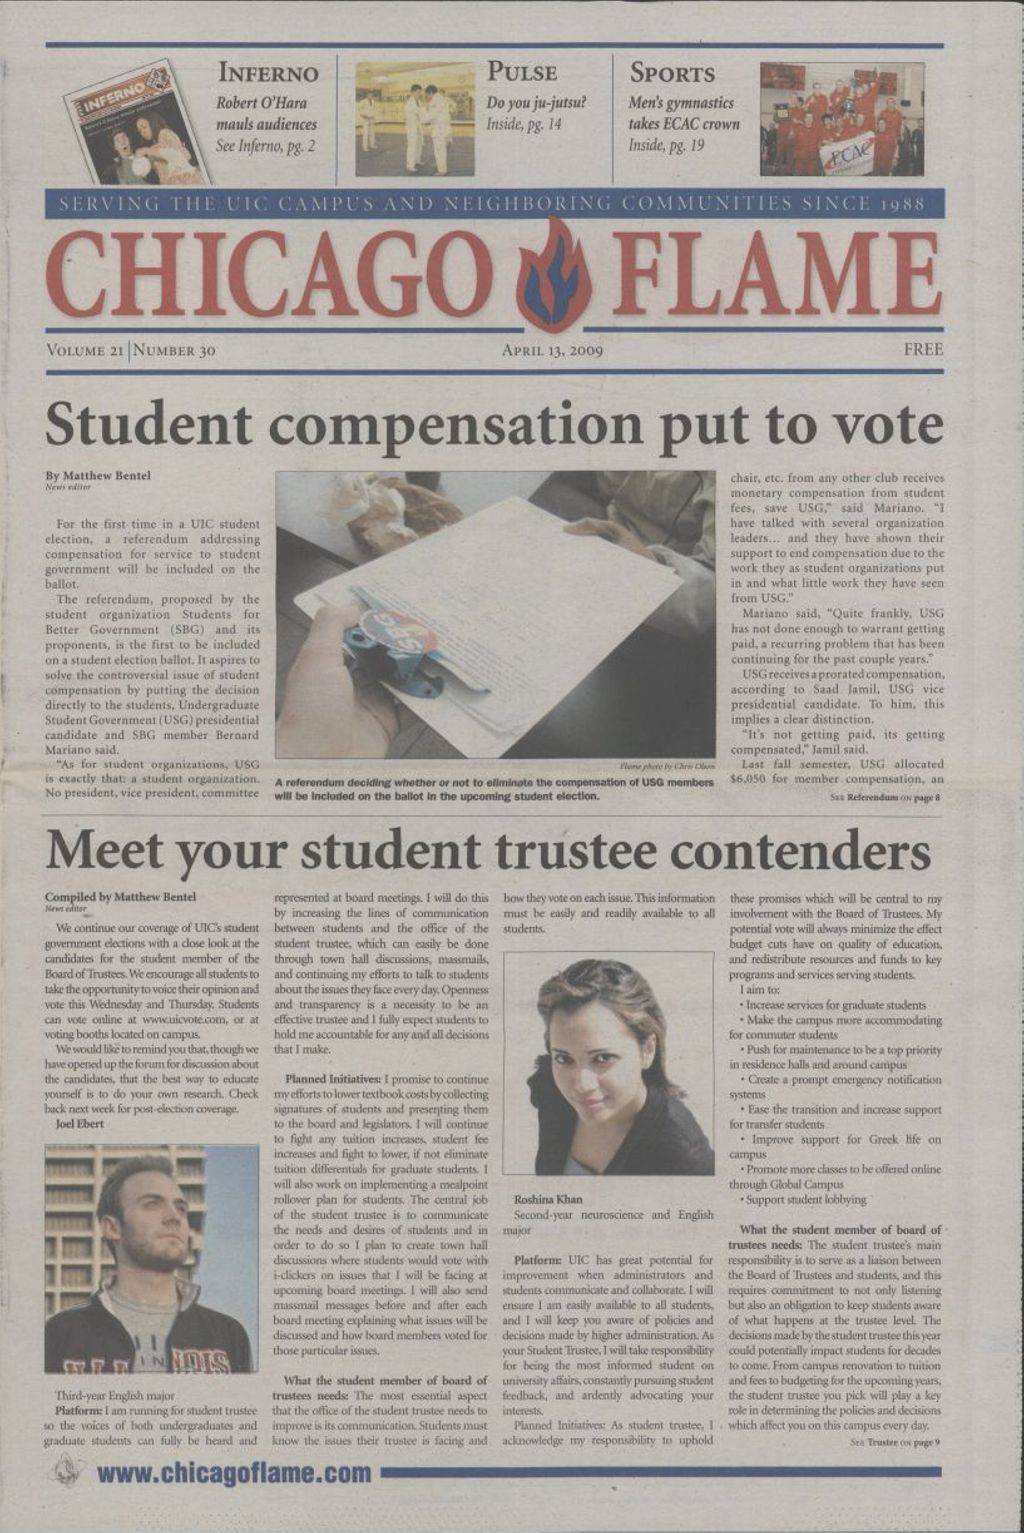 Chicago Flame (April 13, 2009)